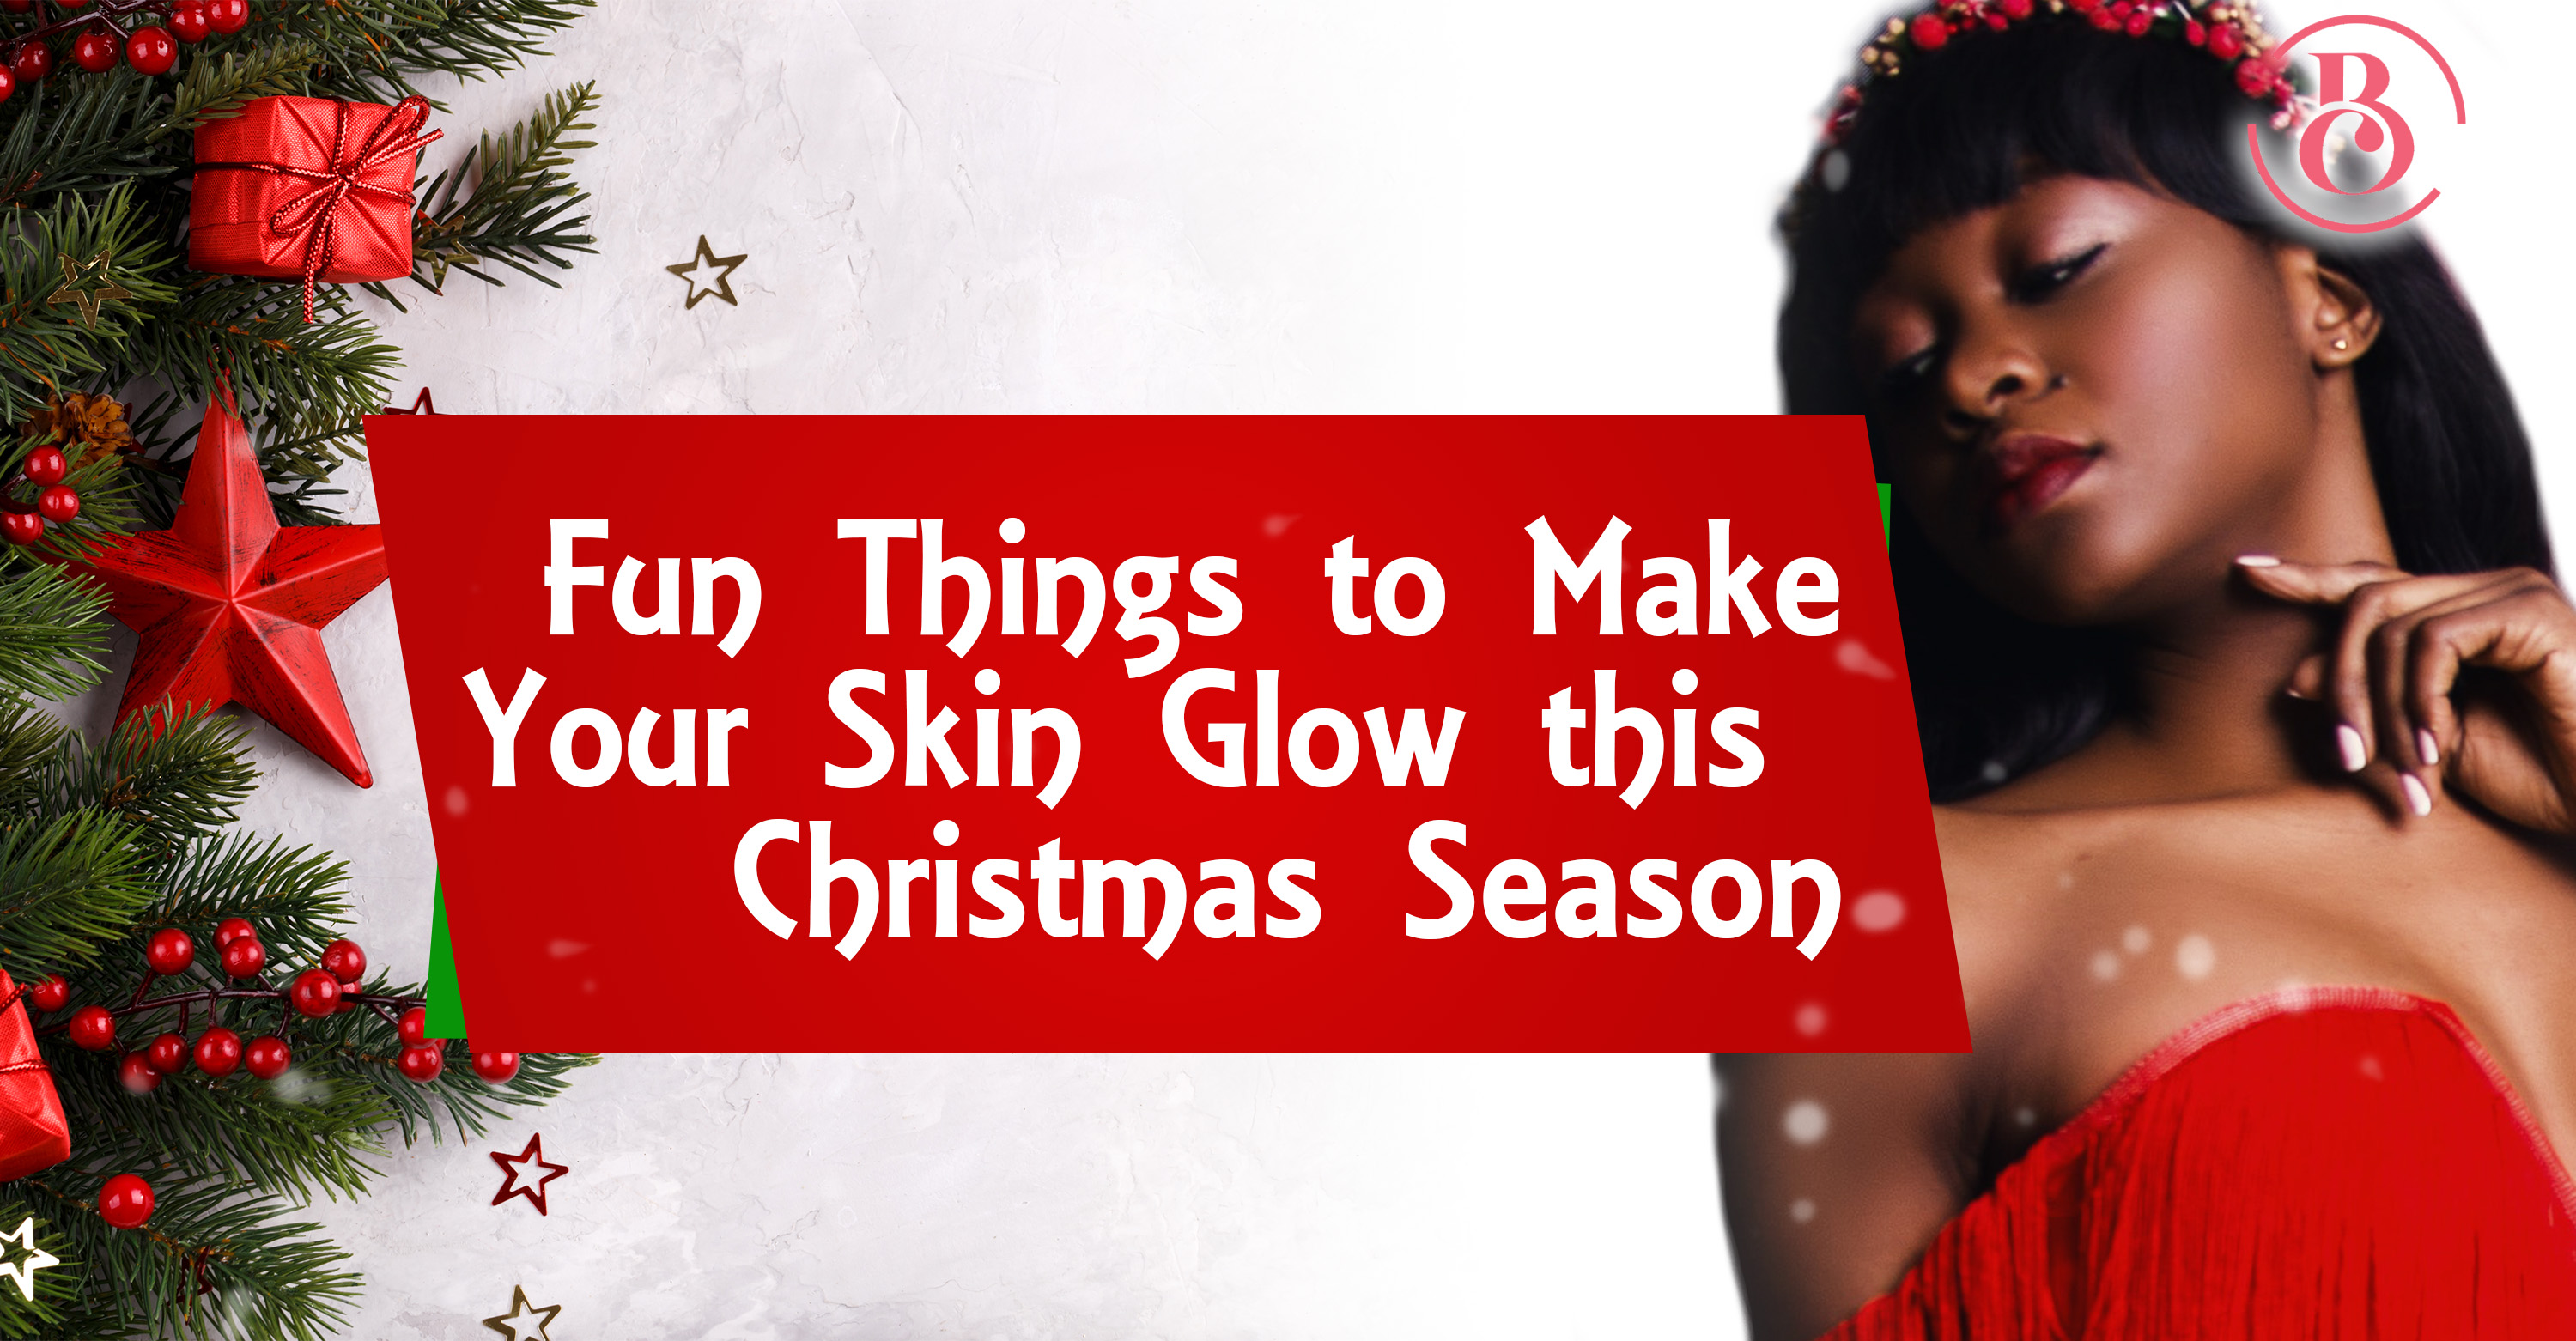 5 Fun Things to Make Your Skin Glow This Christmas